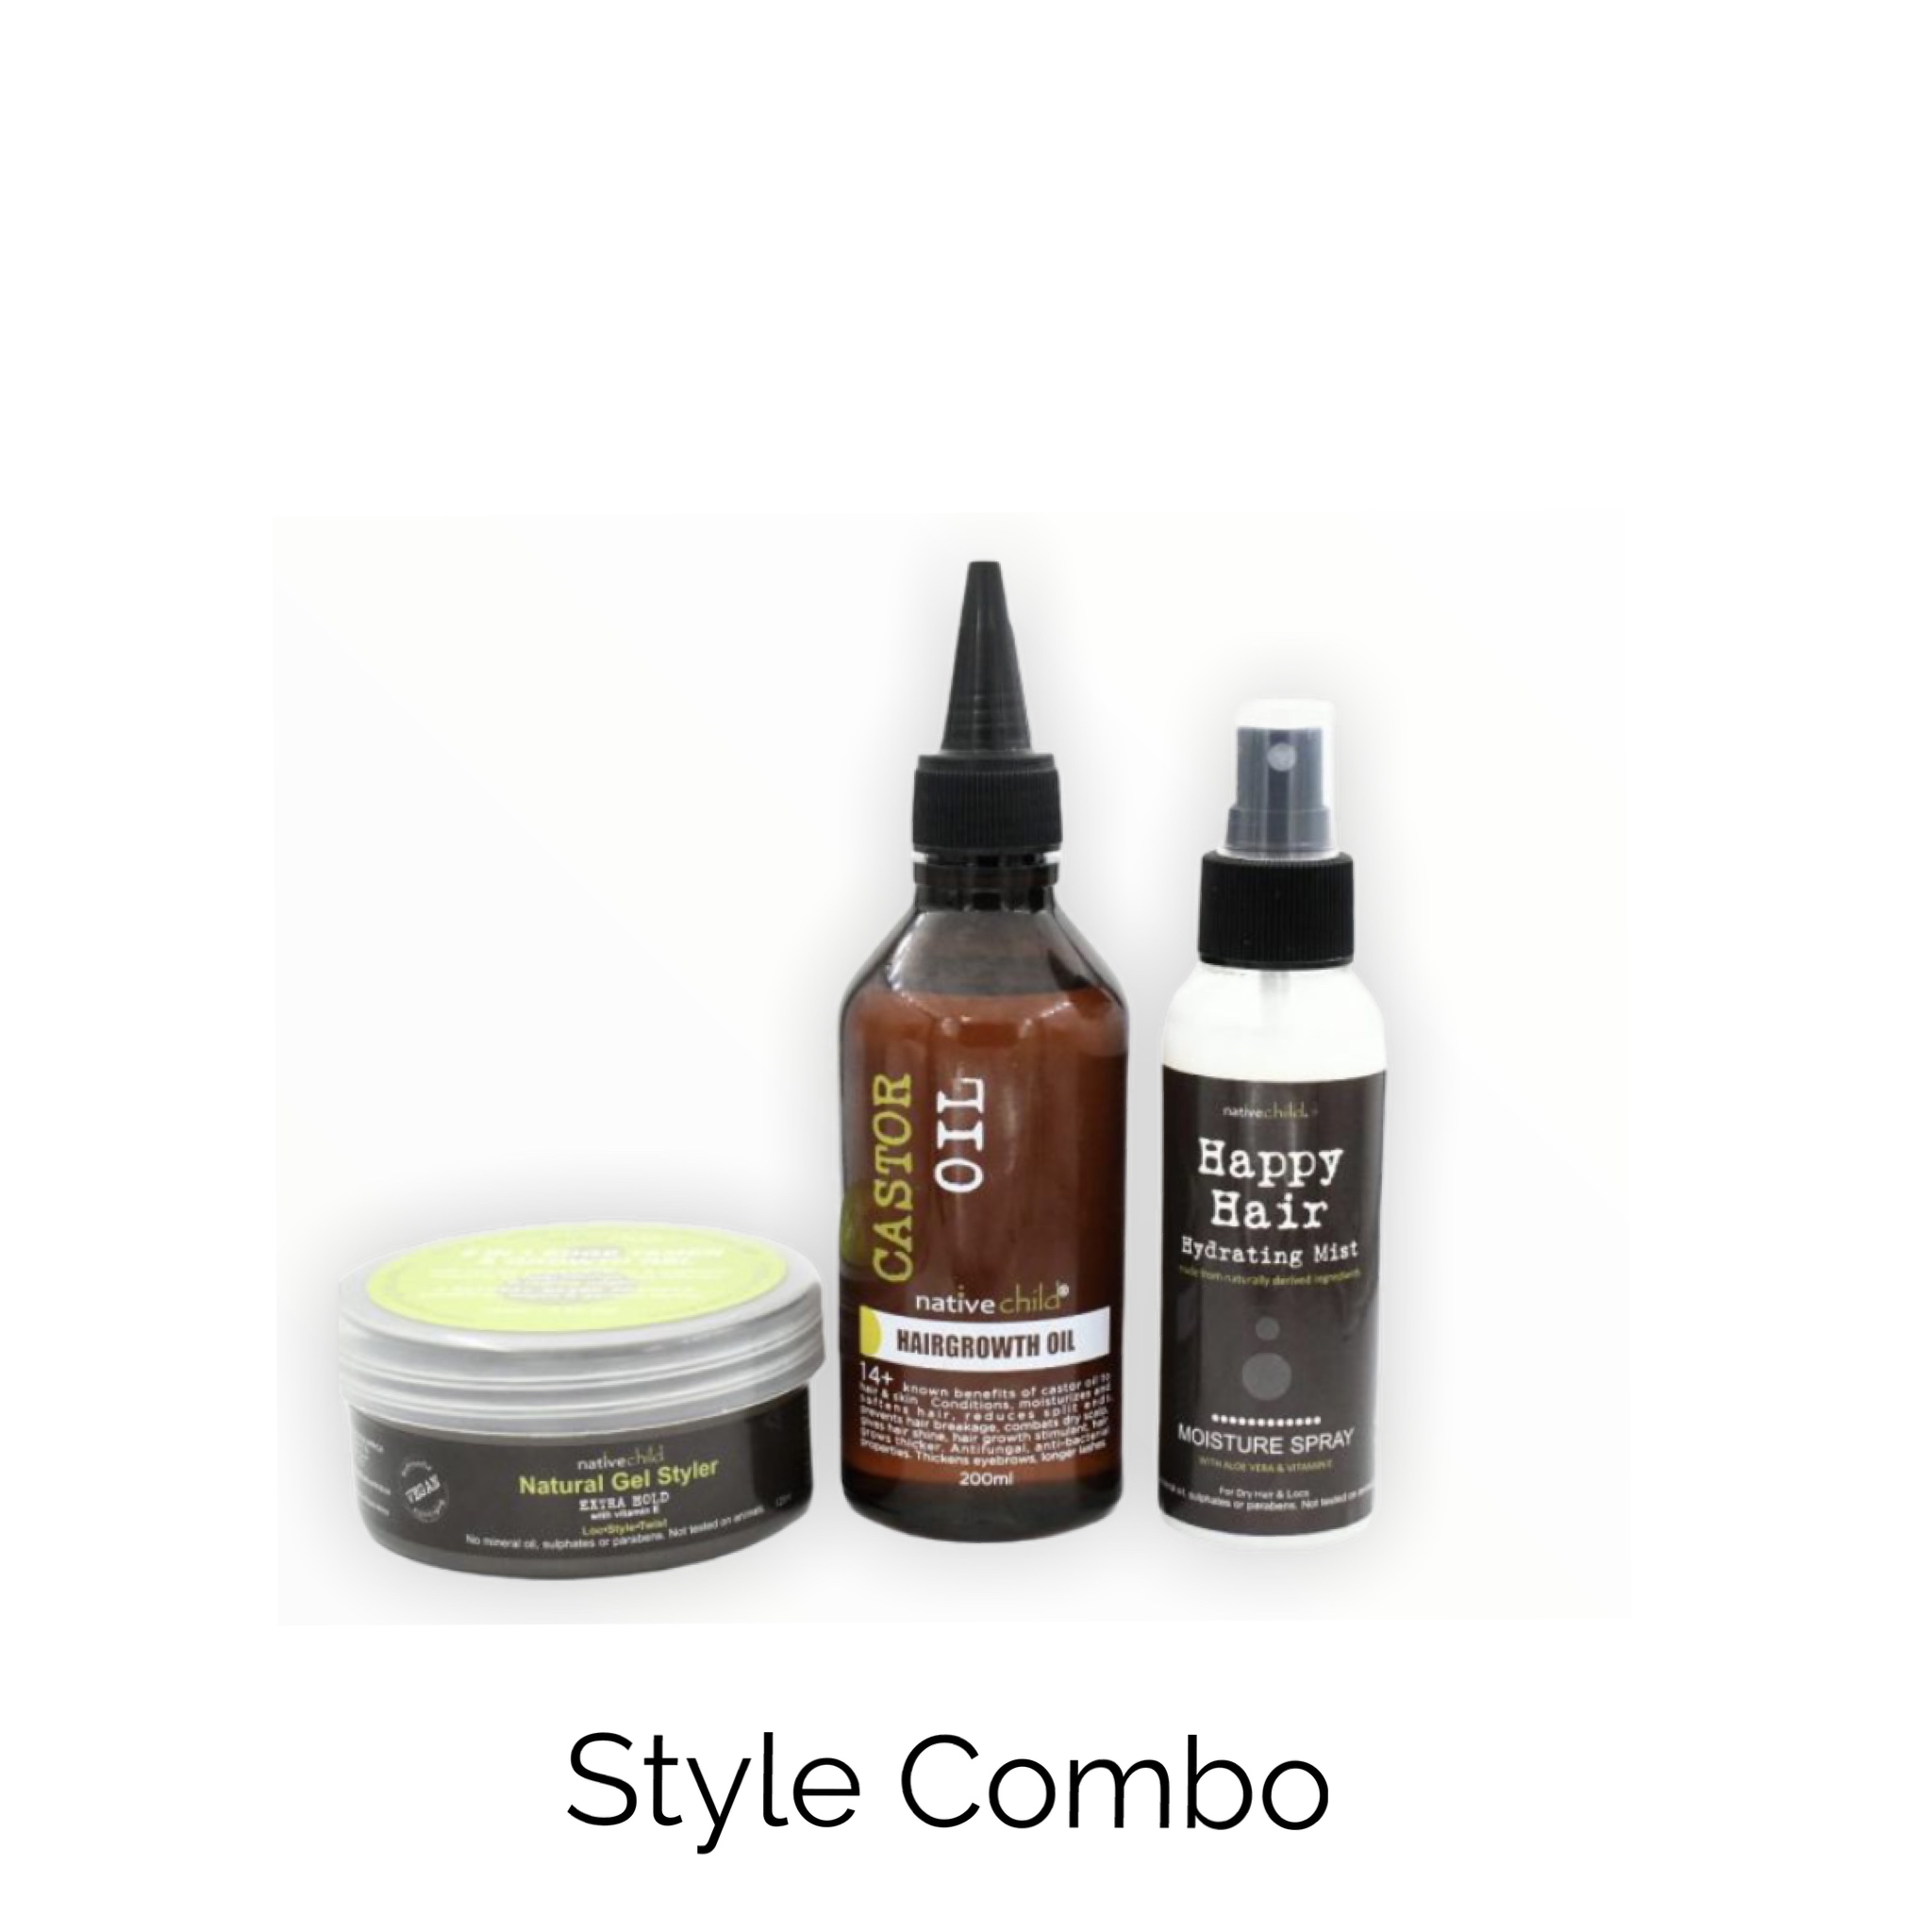 Nativechild Style Combo, Natural Gel Styler, Hair Growth Castor Oil, Happy Hair Hydrating Mist